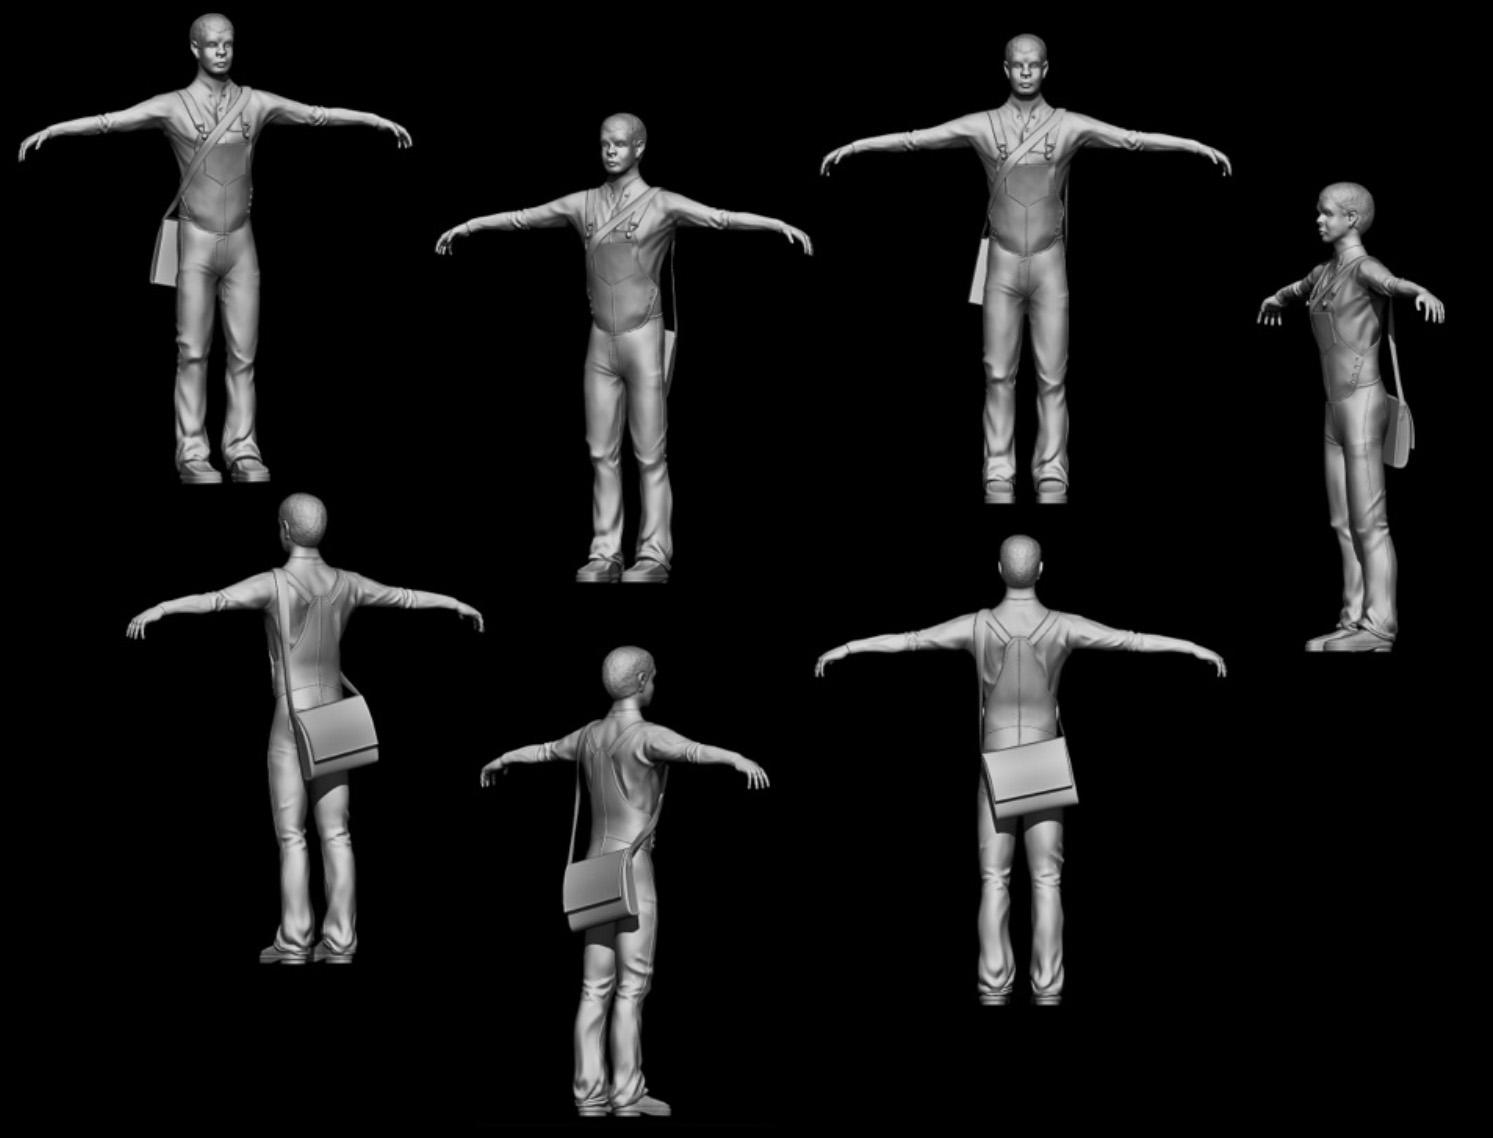 Faculty Receive Grant from NEH for Developing Avatar Creation Techniques